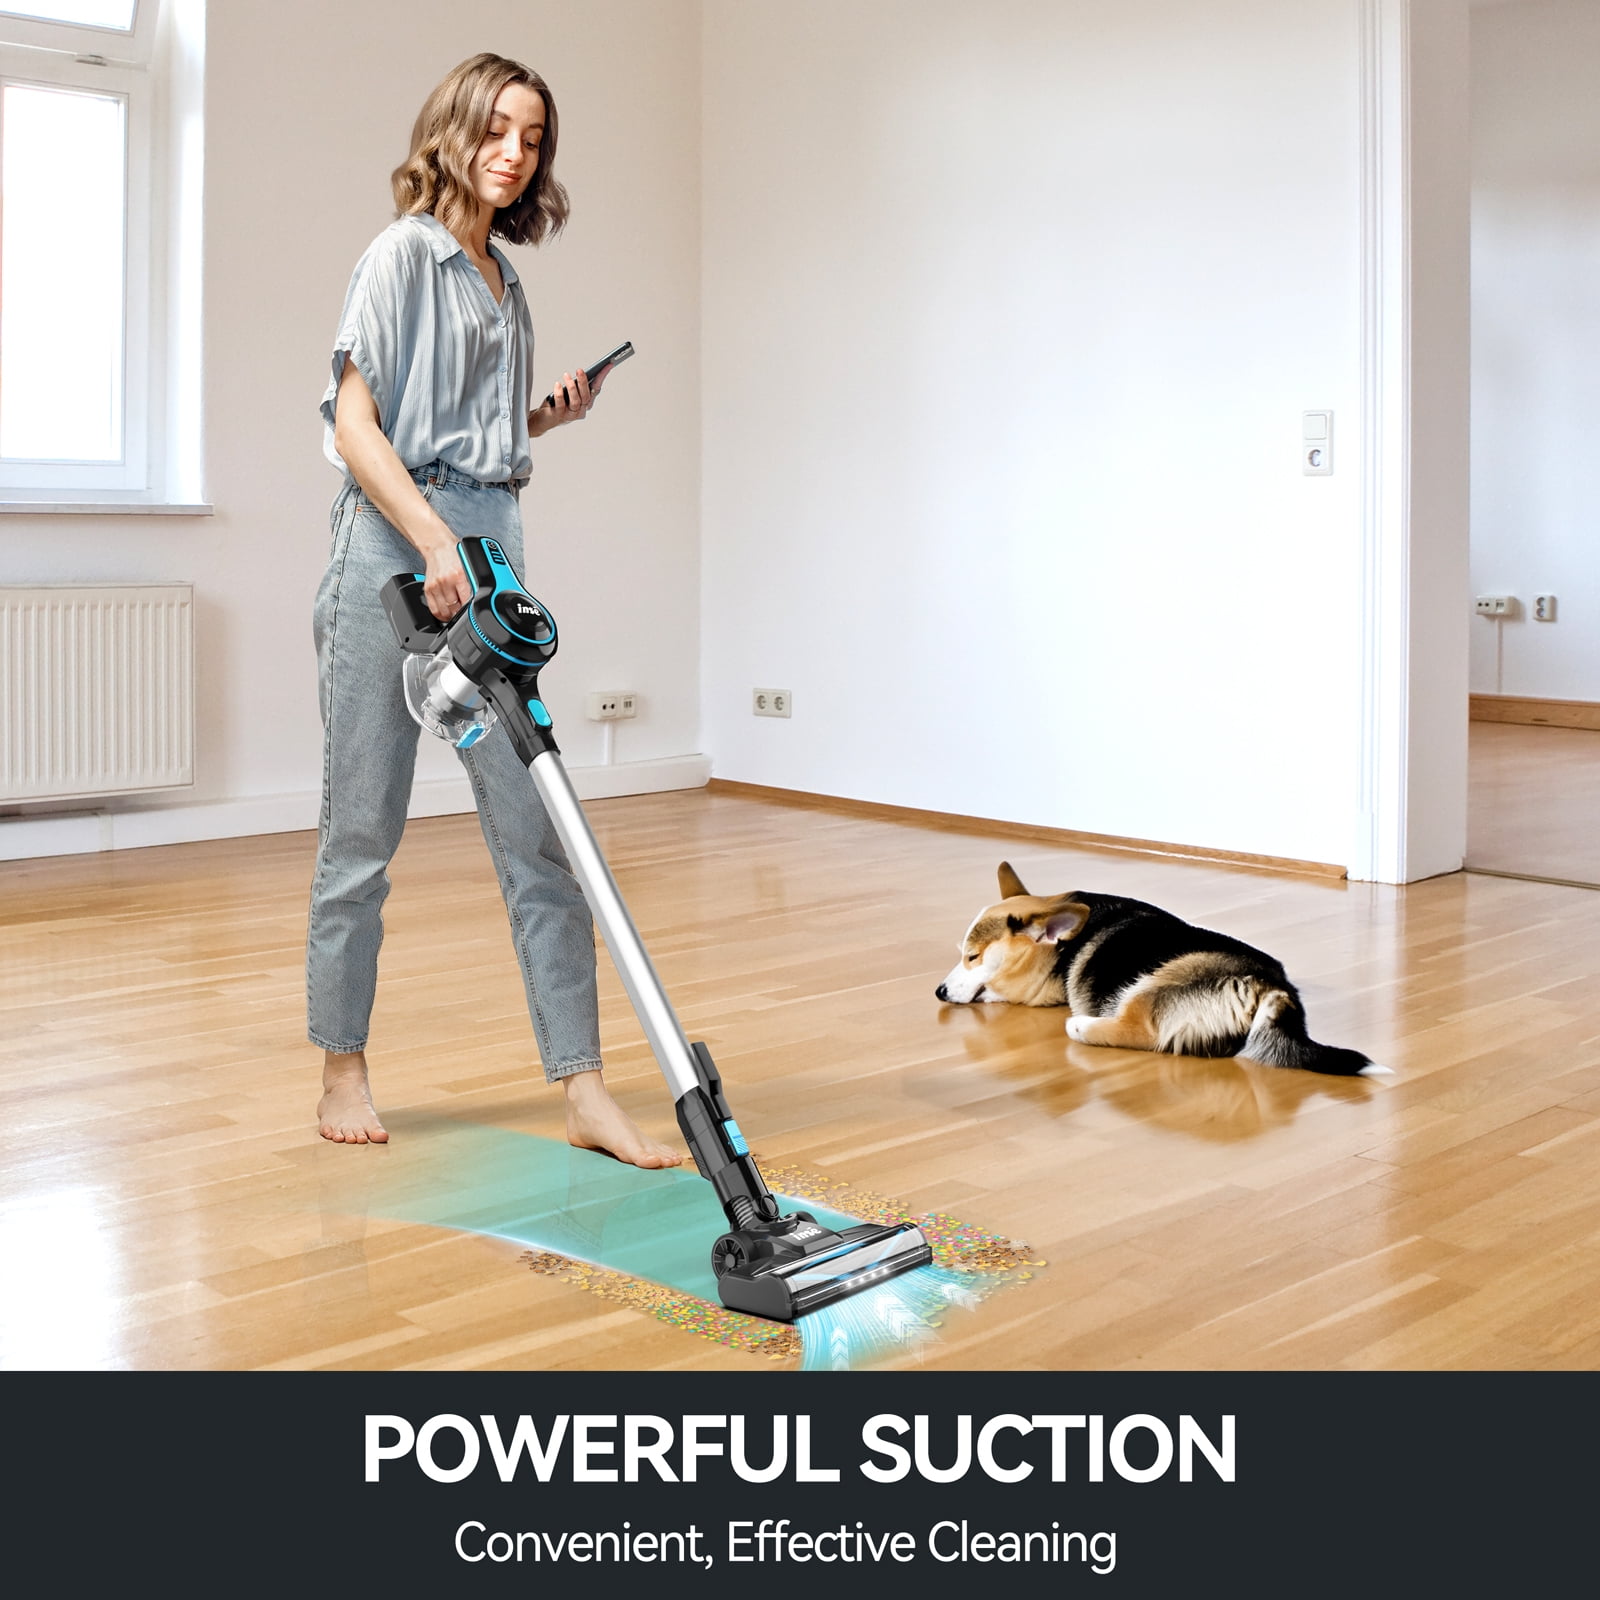 INSE Cordless Vacuum Cleaner,6 in 1 Powerful Stick Handheld Vacuum with  2200mAh Rechargeable Battery,20Kpa Vacuum Cleaner,45min Runtime,Lightweight